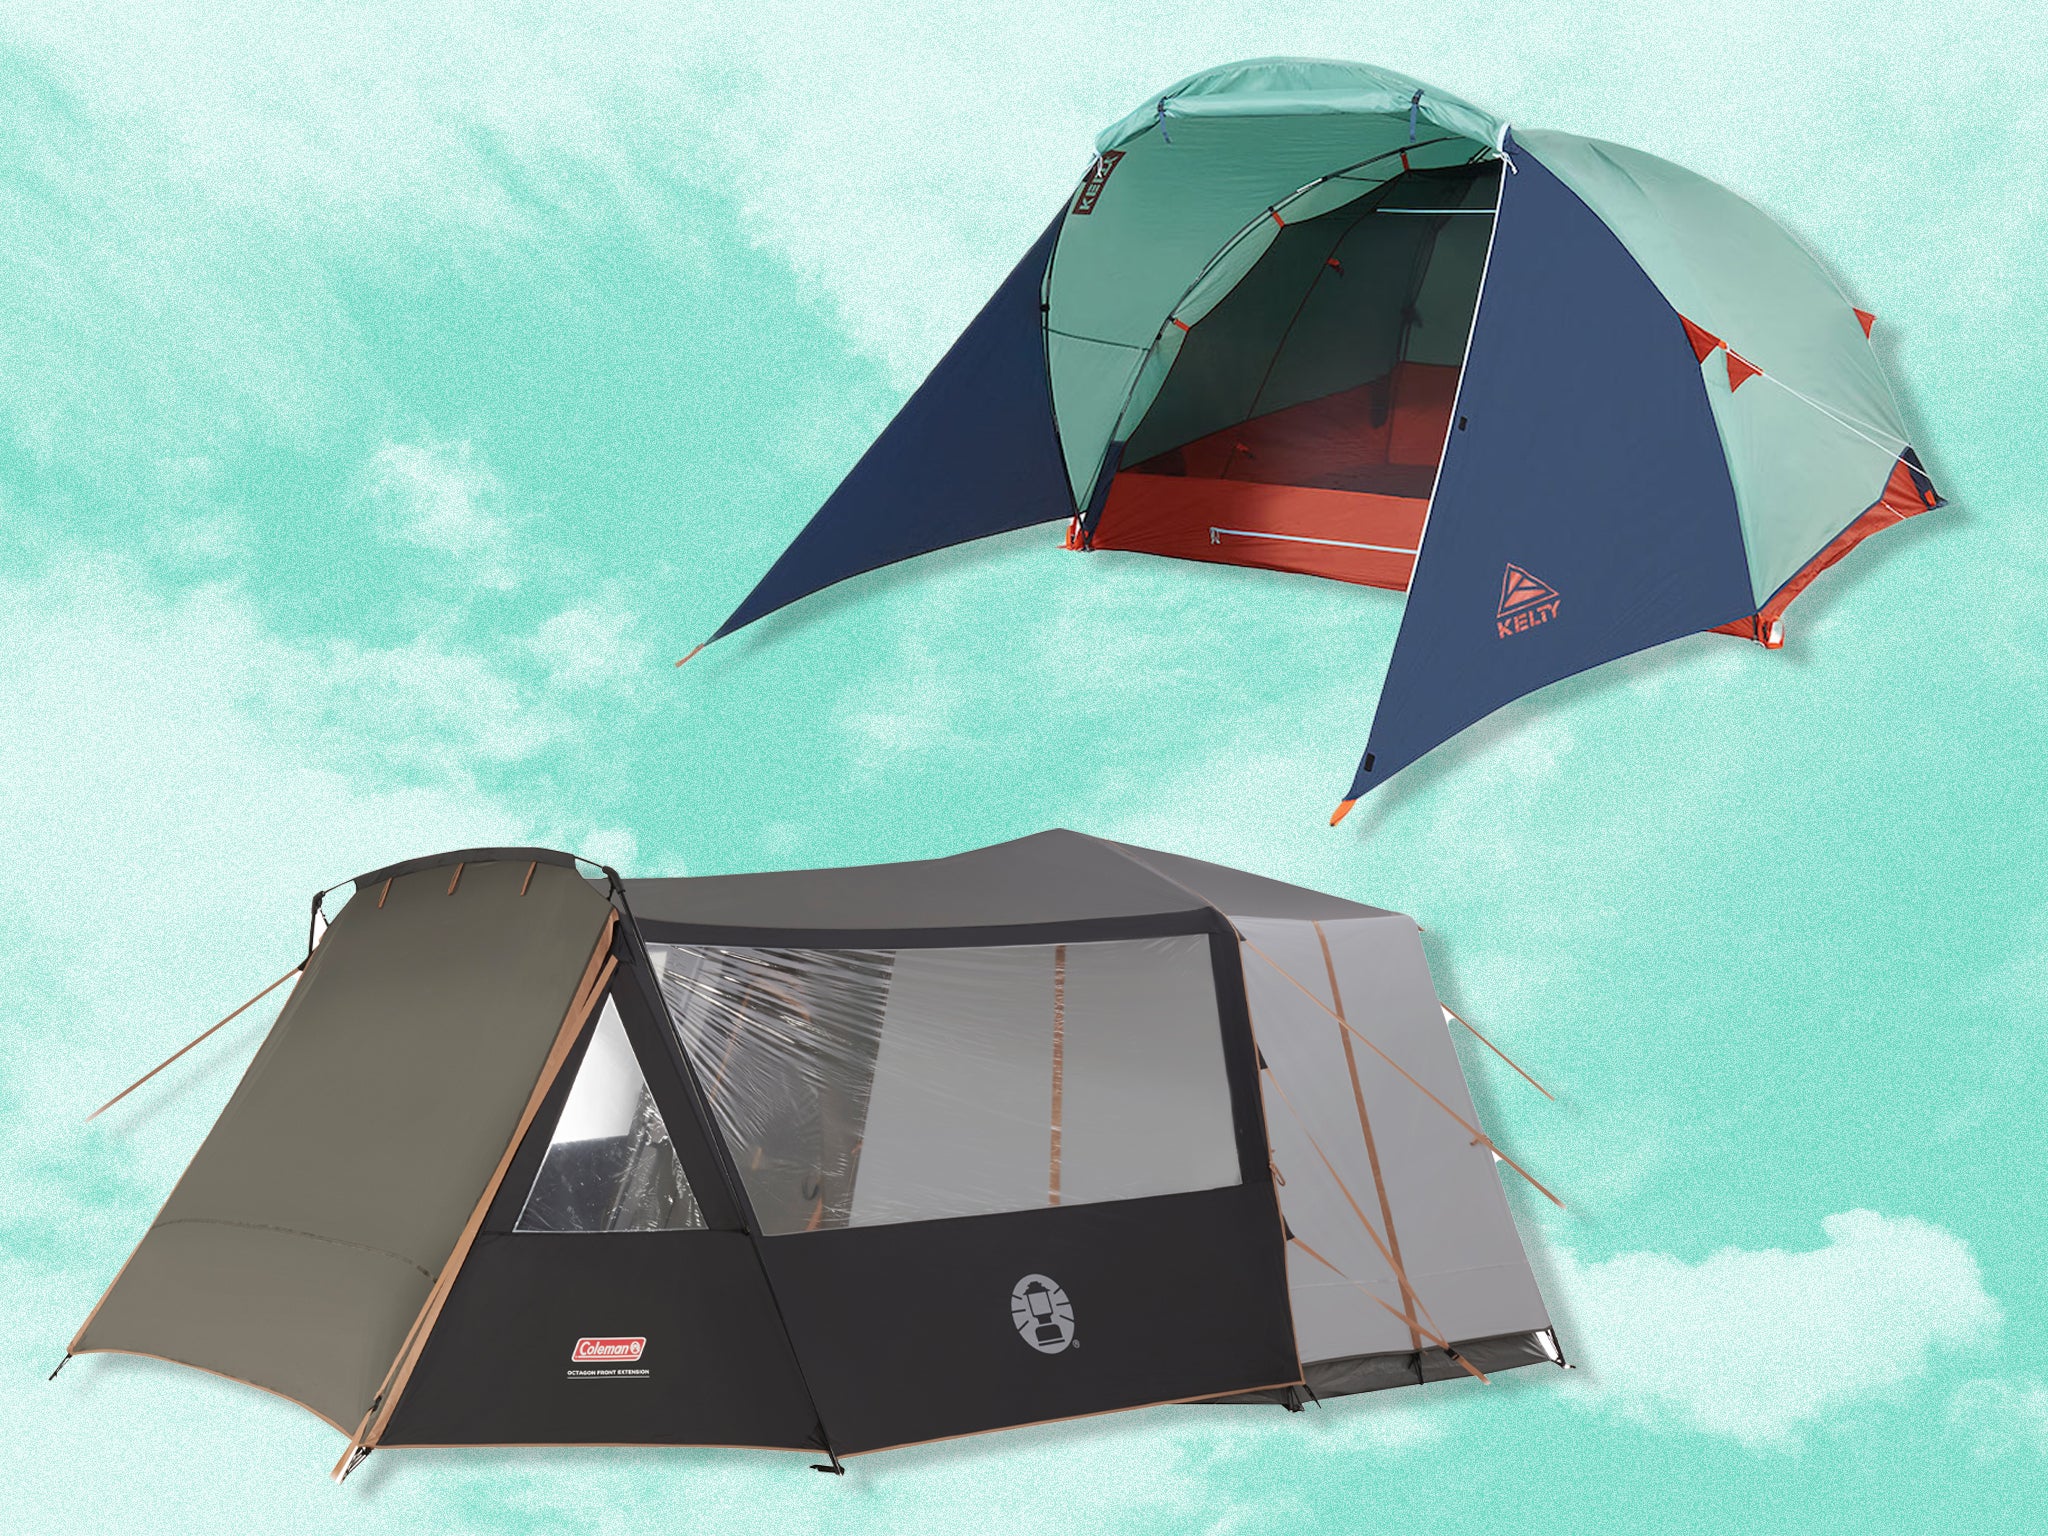 Whether for glamping, hiking or camping in the wild camping there’ll be something to suit